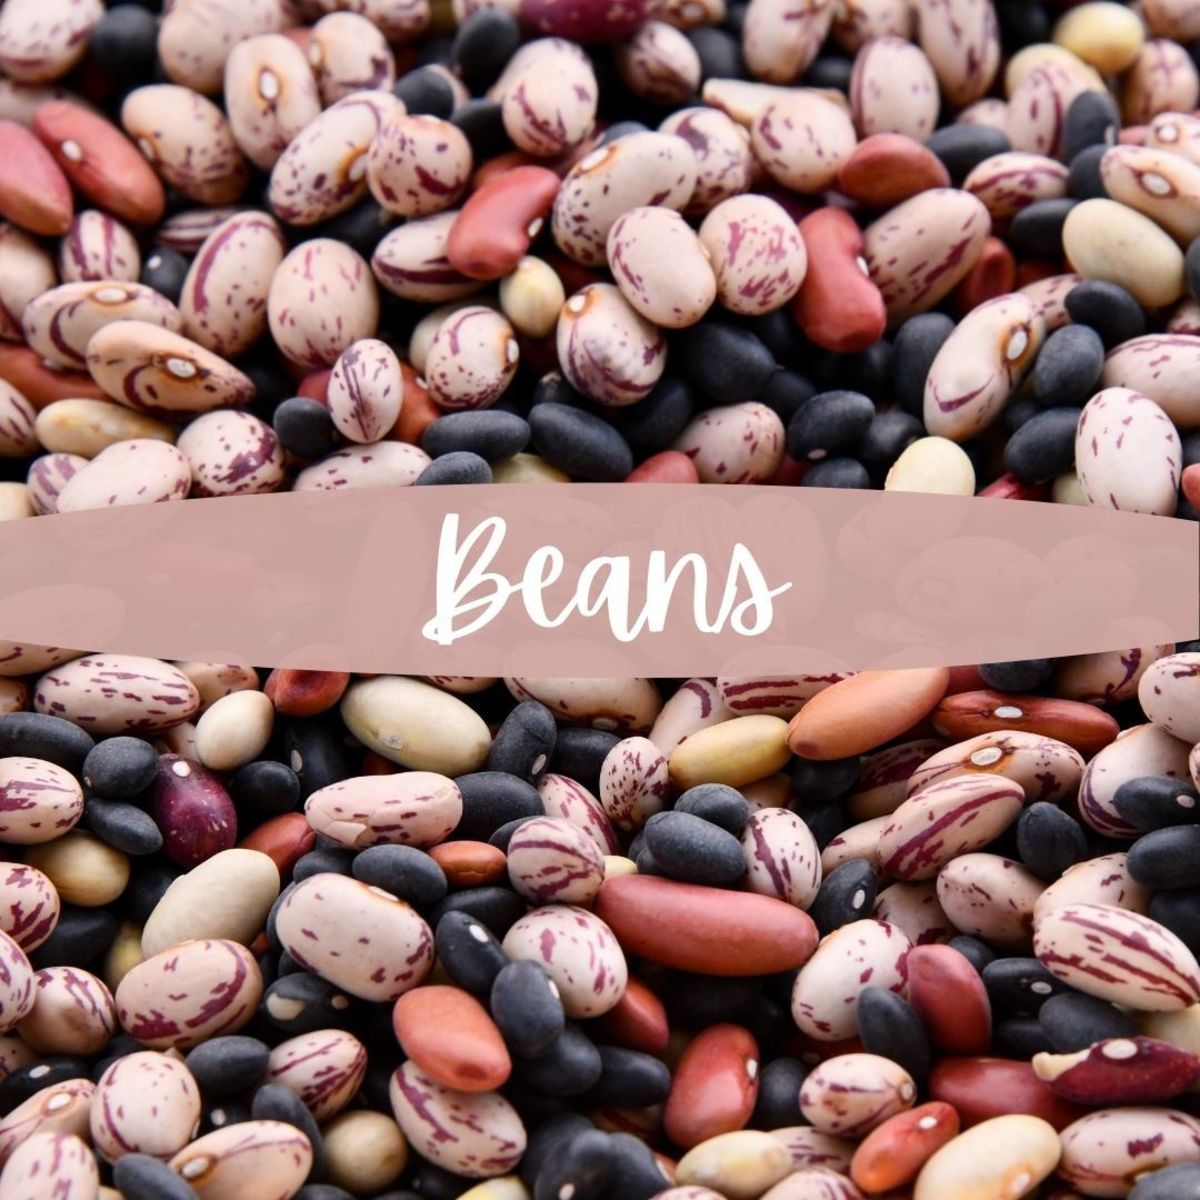 Beans! There are so many varieties. Most are rich in iron, as well as many other important nutrients. Don't avoid beans for the fear of gas. Toss in some garlic, a potent gas buster and digestion soother.